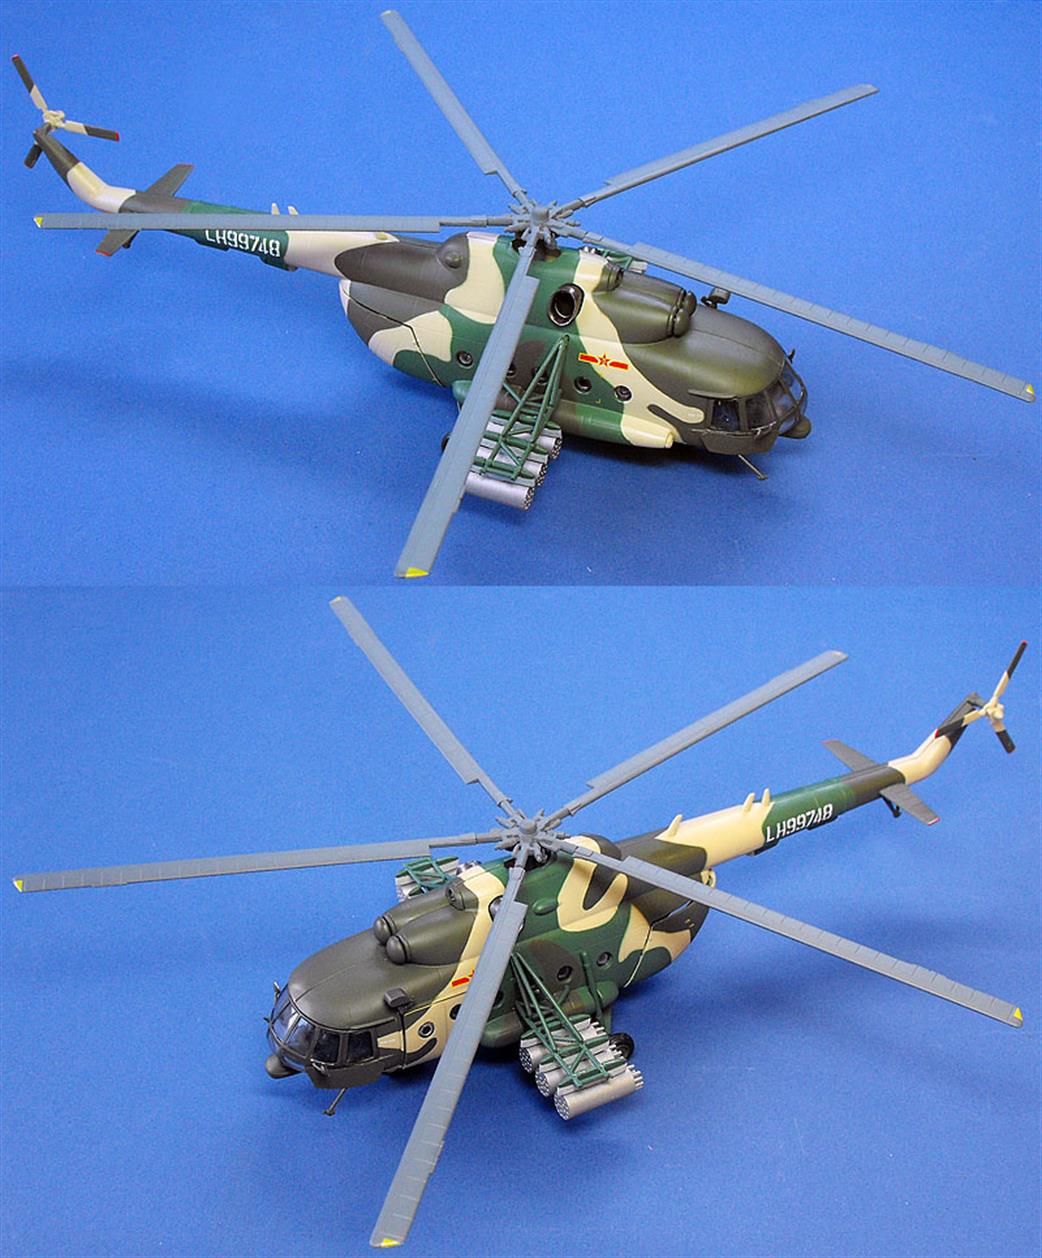 Witty Wings WTW72-102-01NPQ MI-171 China Air Force LH99748 Helicopter Model 1/72